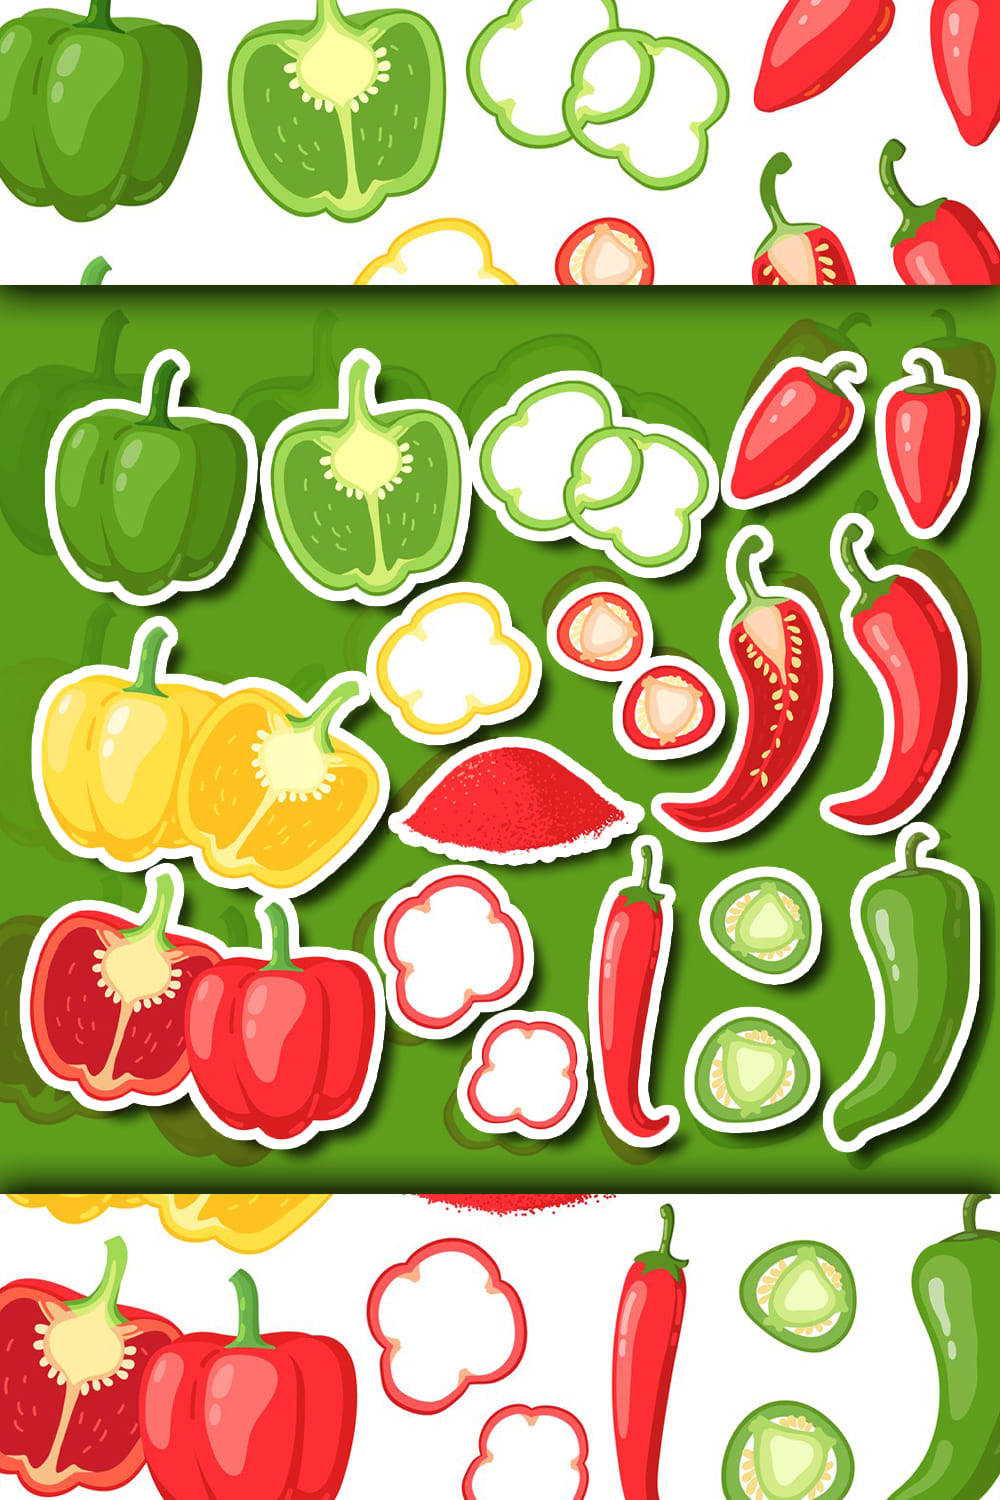 975692 cartoon peppers sweet red yellow and hot peppers b pinterest 1000 1500